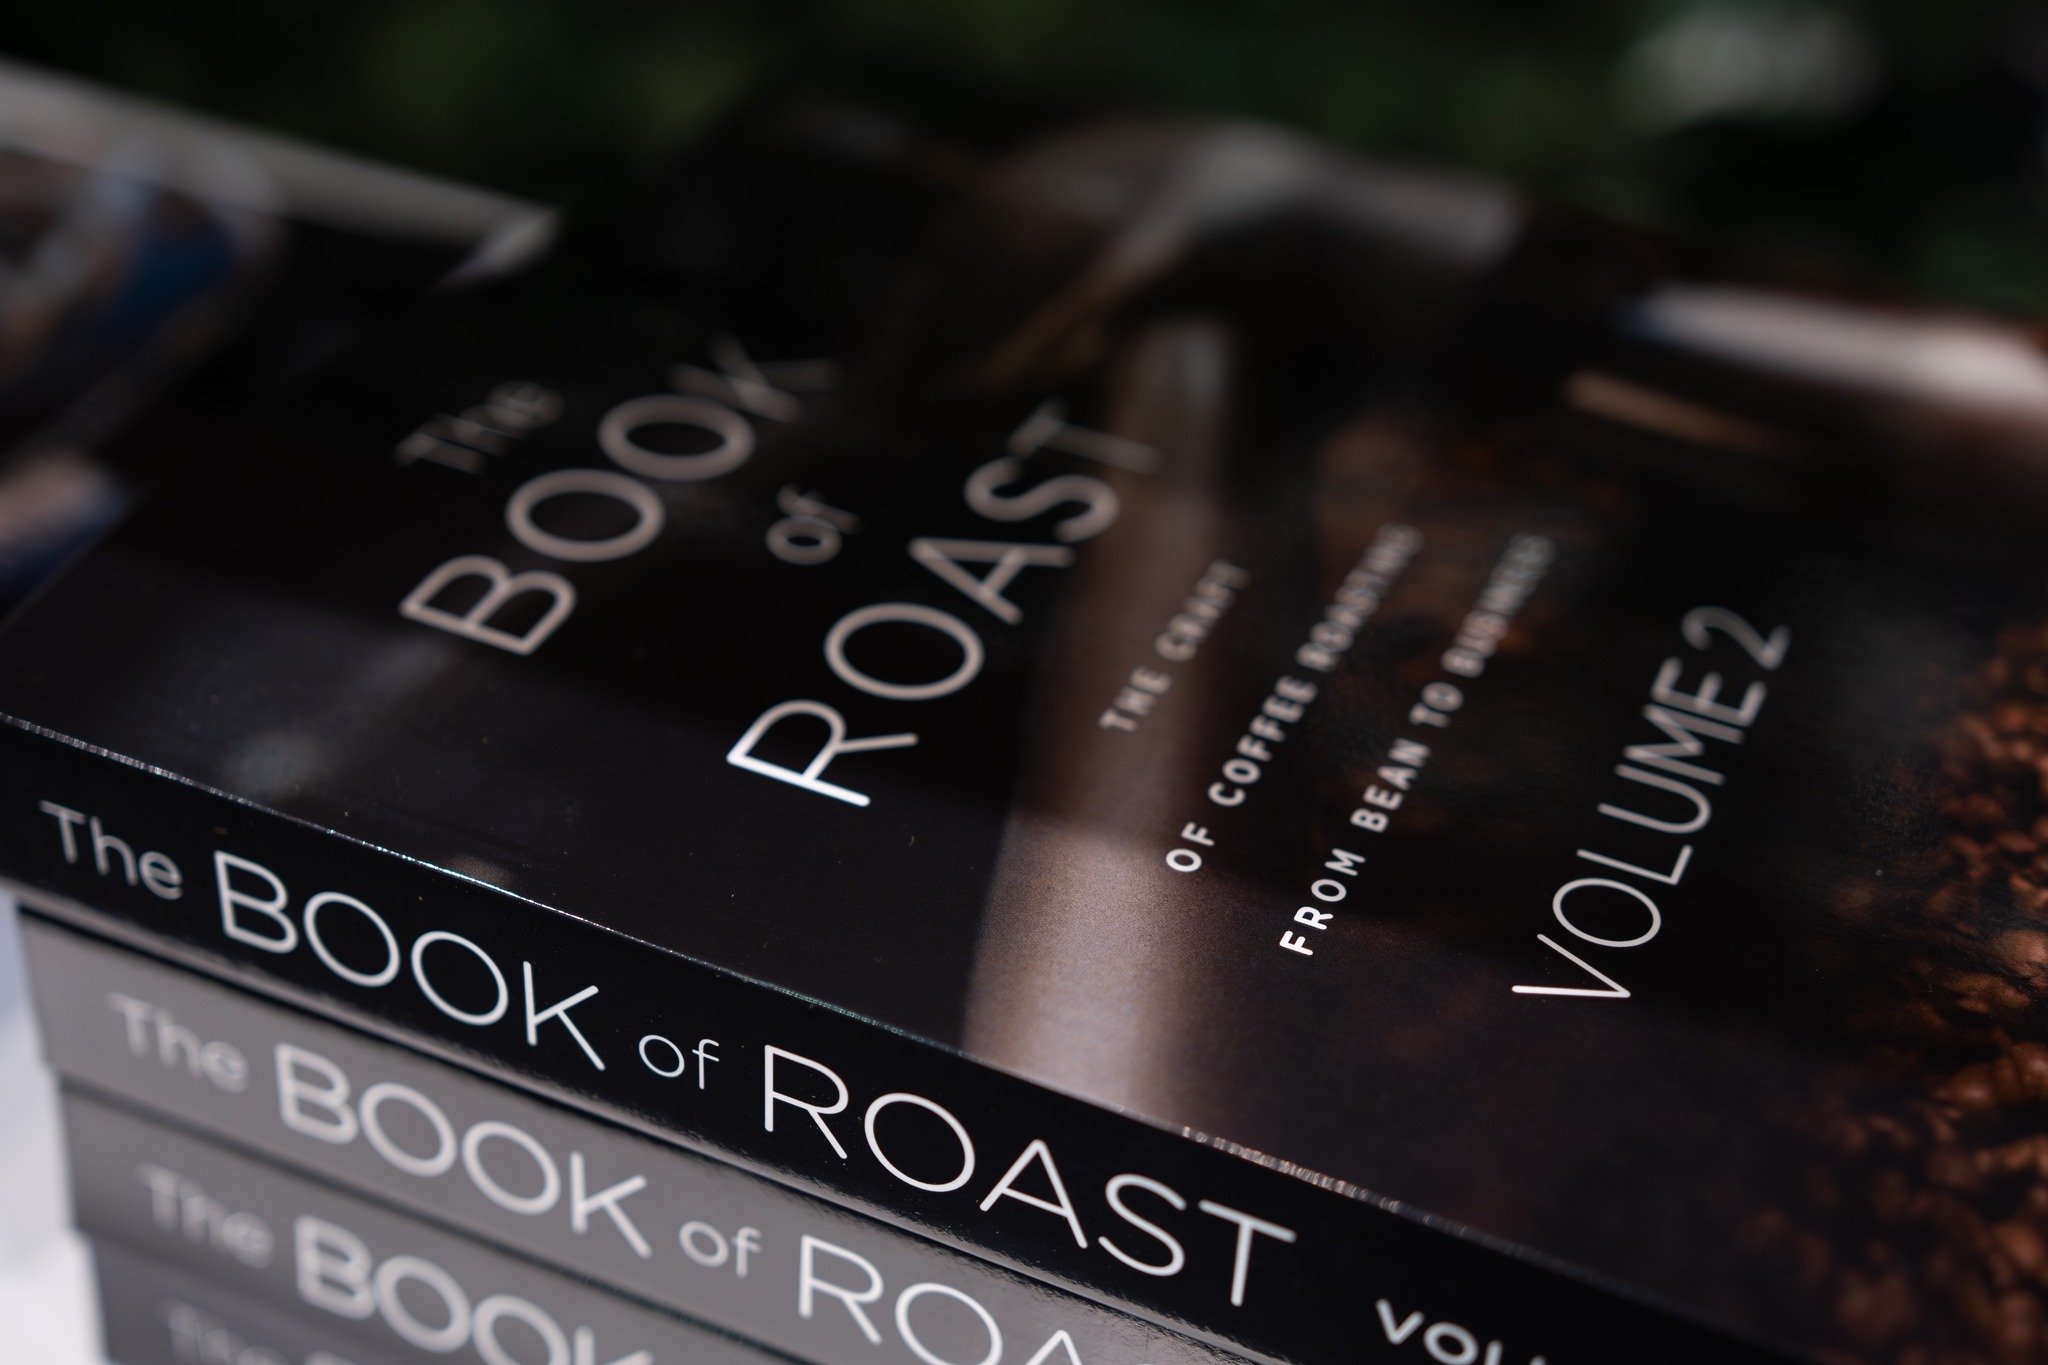 &quot;The Book of Roast: Volume 2&quot; is available now as a bundle with Volume 1 for just $200! Explore the science and techniques behind the craft of coffee roasting, from bean to business, across nearly 500 pages each. Both books offer a unique c